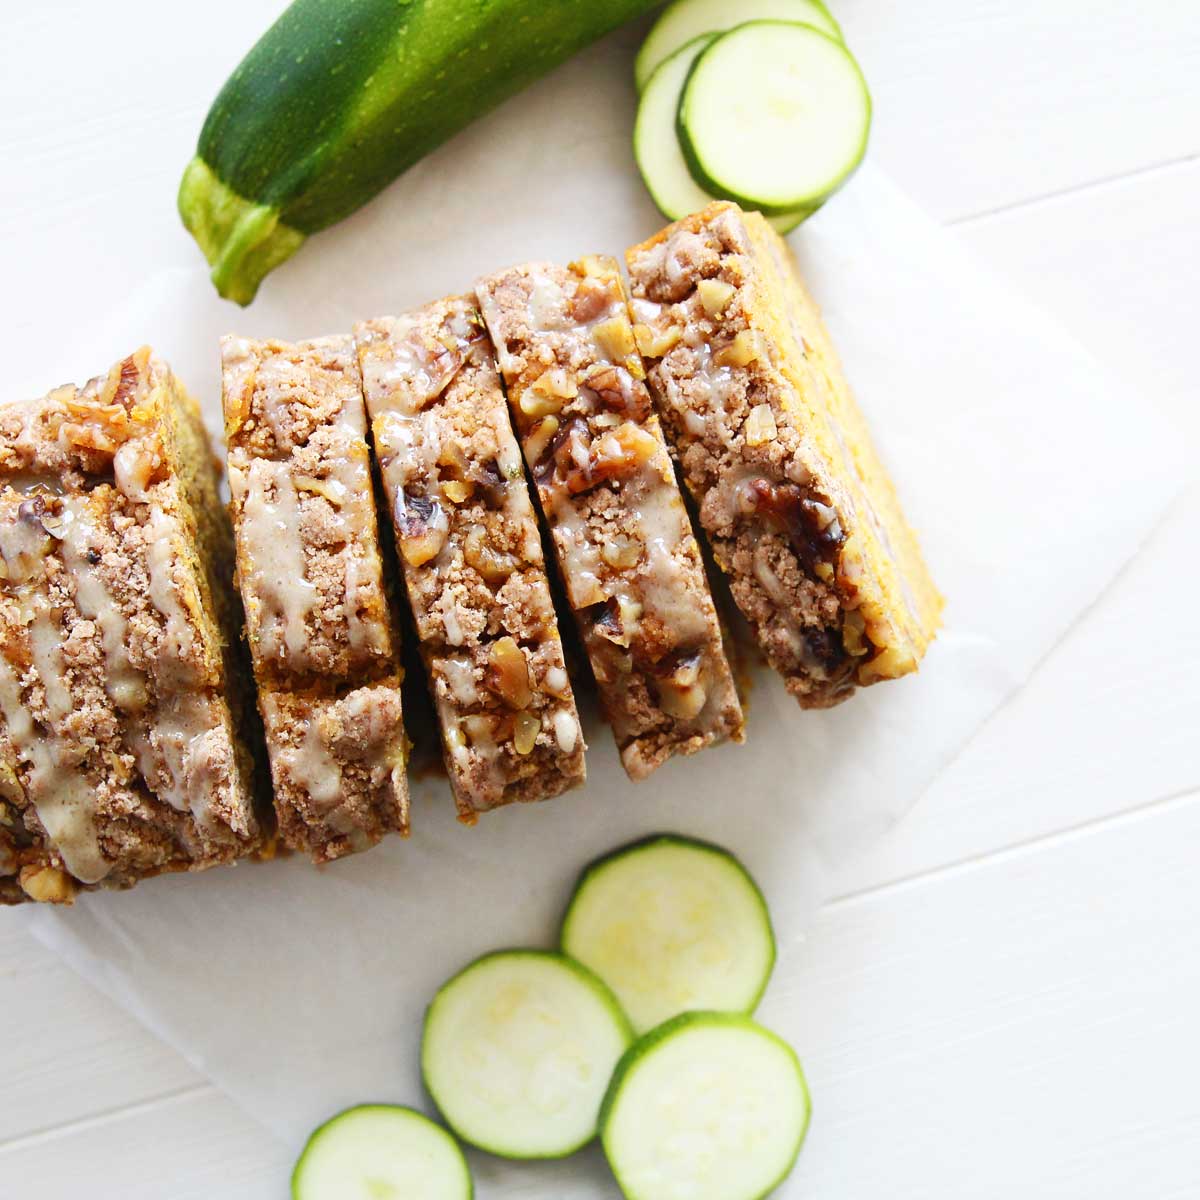 Zucchini Pumpkin Bread with Easy Walnut Streusel Topping (Vegan-Friendly!) - topping variations